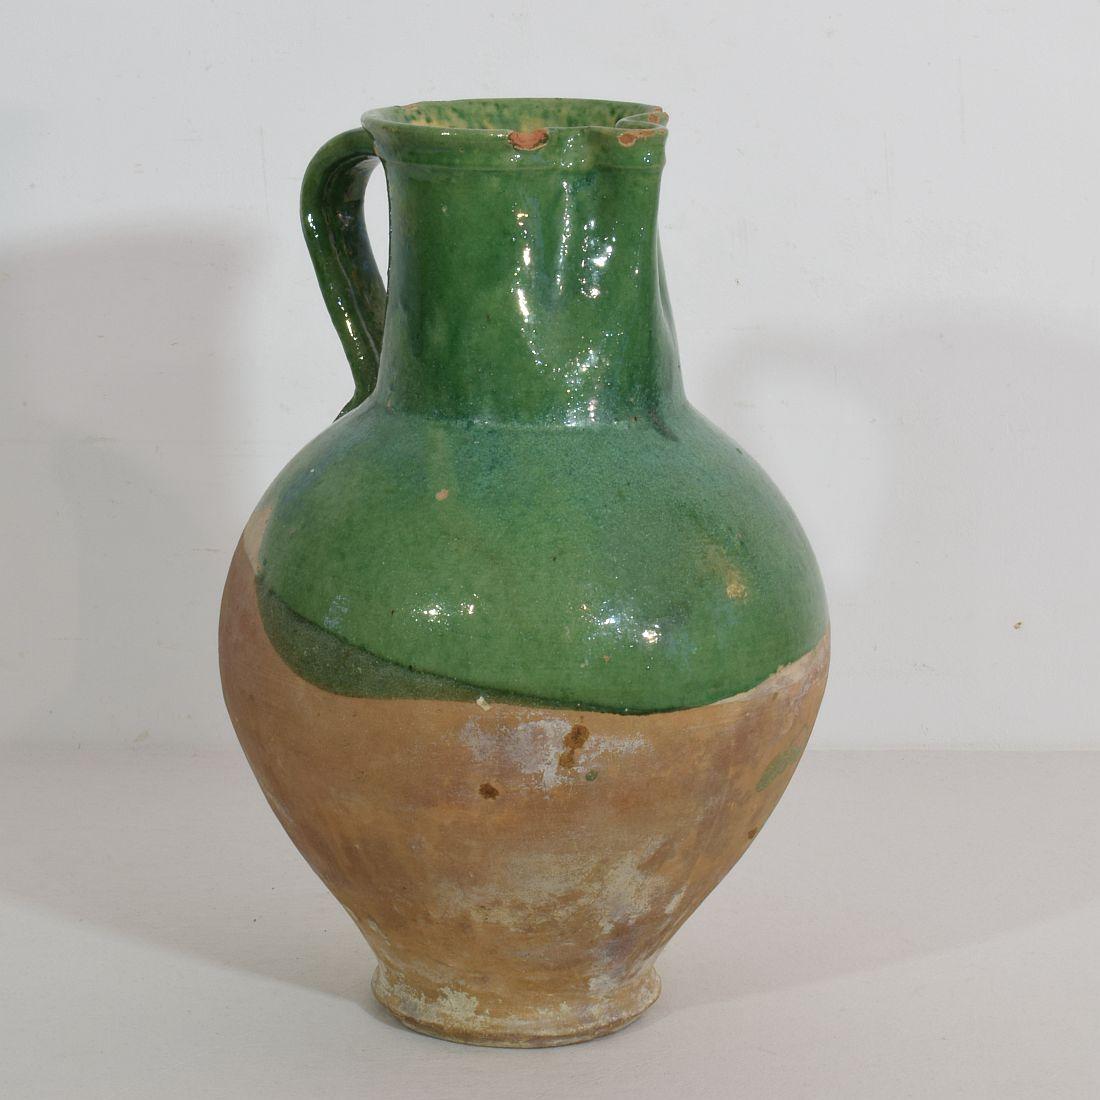 Great authentic and rare piece of pottery from the Provence. Beautiful weathered and an amazing color. Imperfections help authenticate this water cruche as it was a utilitarian type piece, France, circa 1850.